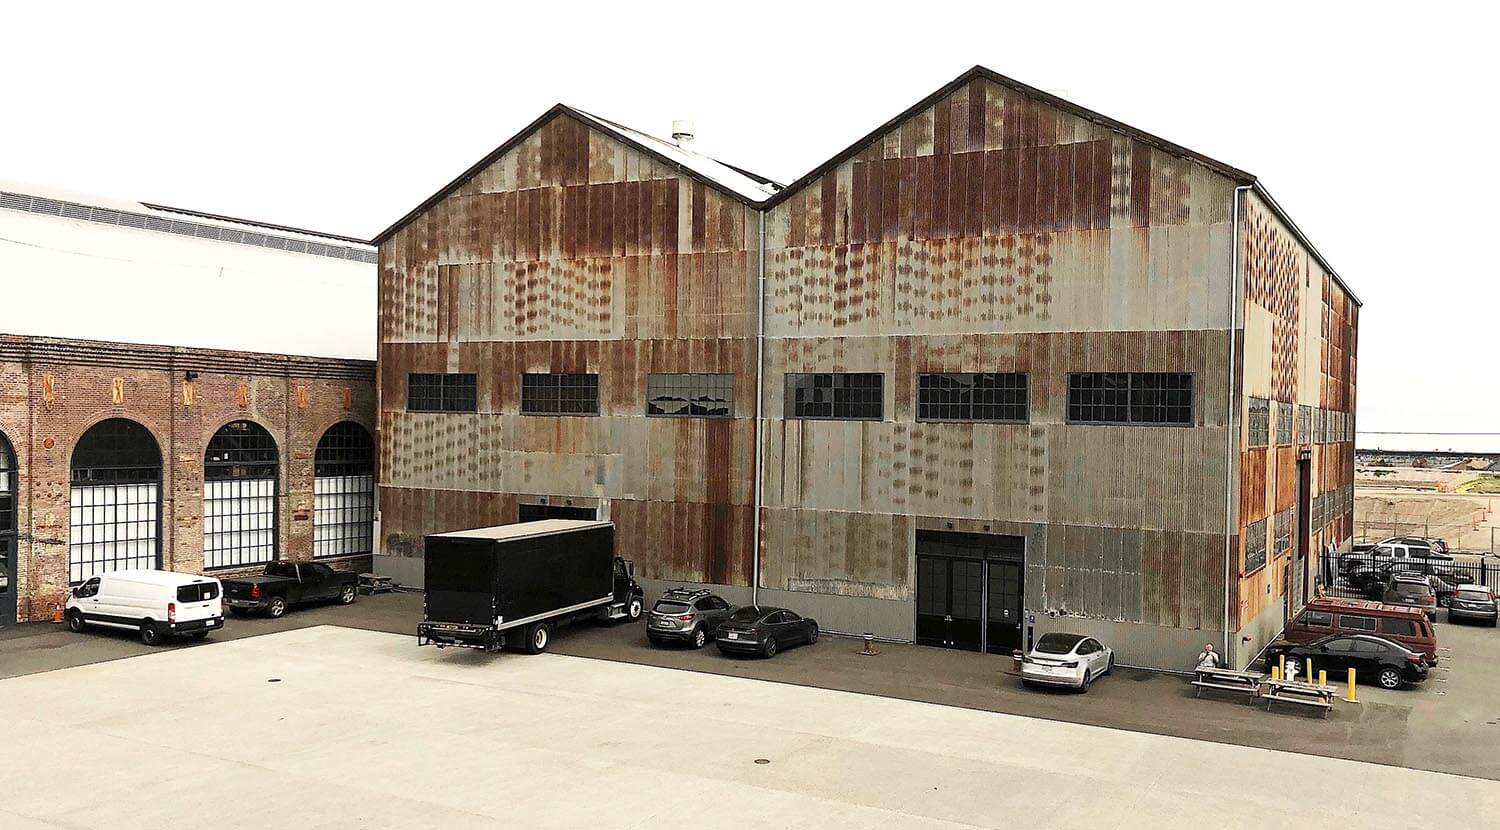 Exterior view of rusted metal building at Pier 70, Building 14 in San Francisco